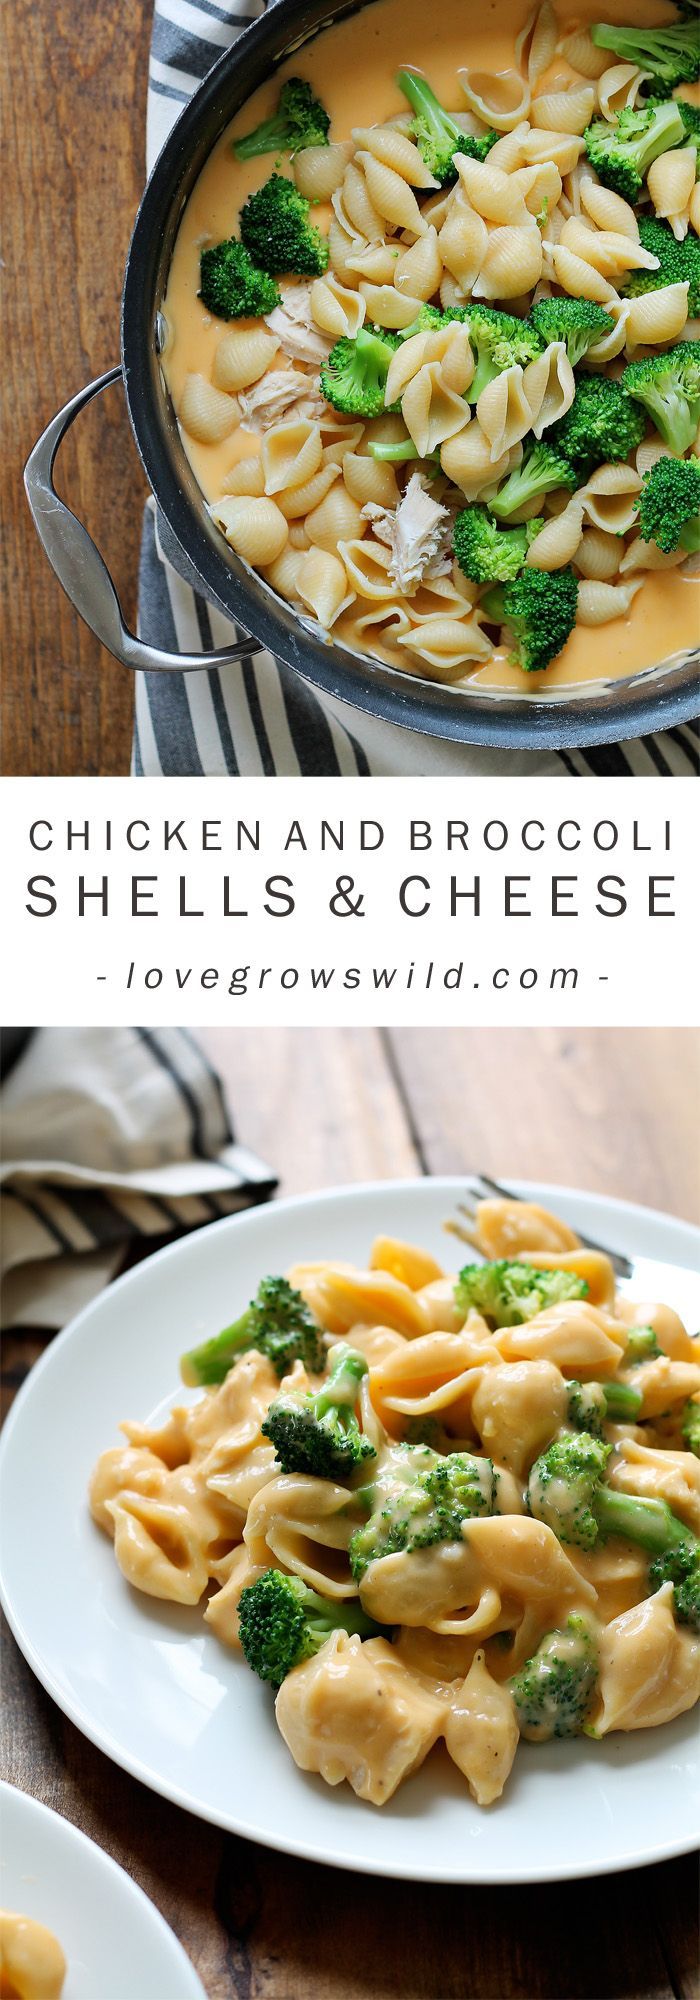 Chicken and Broccoli Shells and Cheese – “Love Grows Wild” on FoodBlogs.com